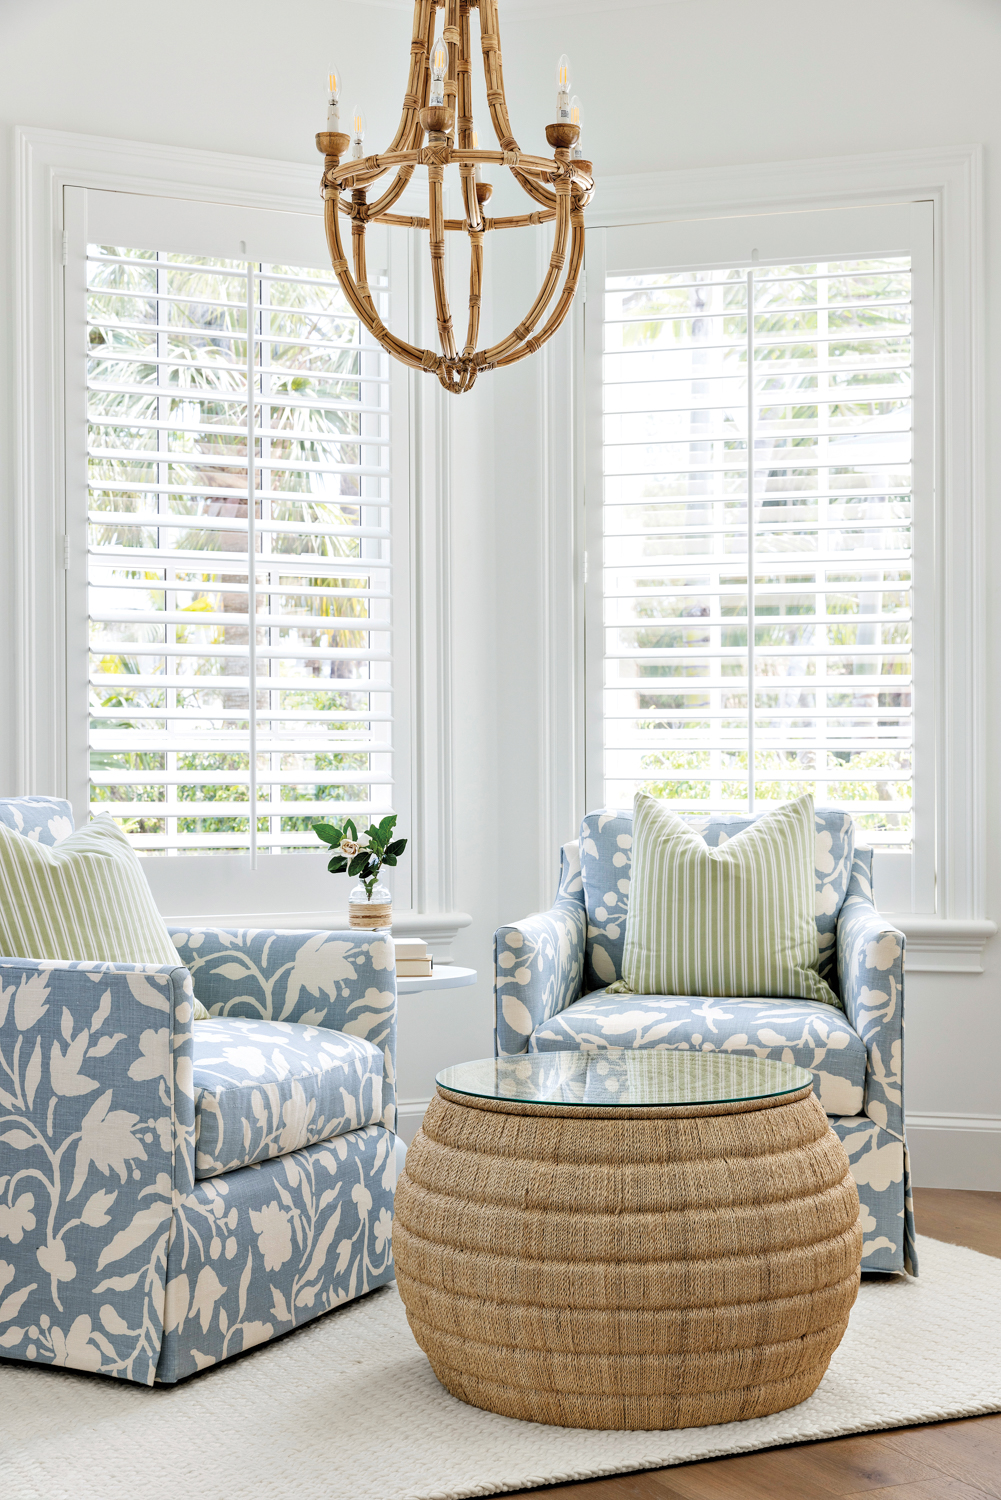 Bedroom seating nook with blue-patterned...